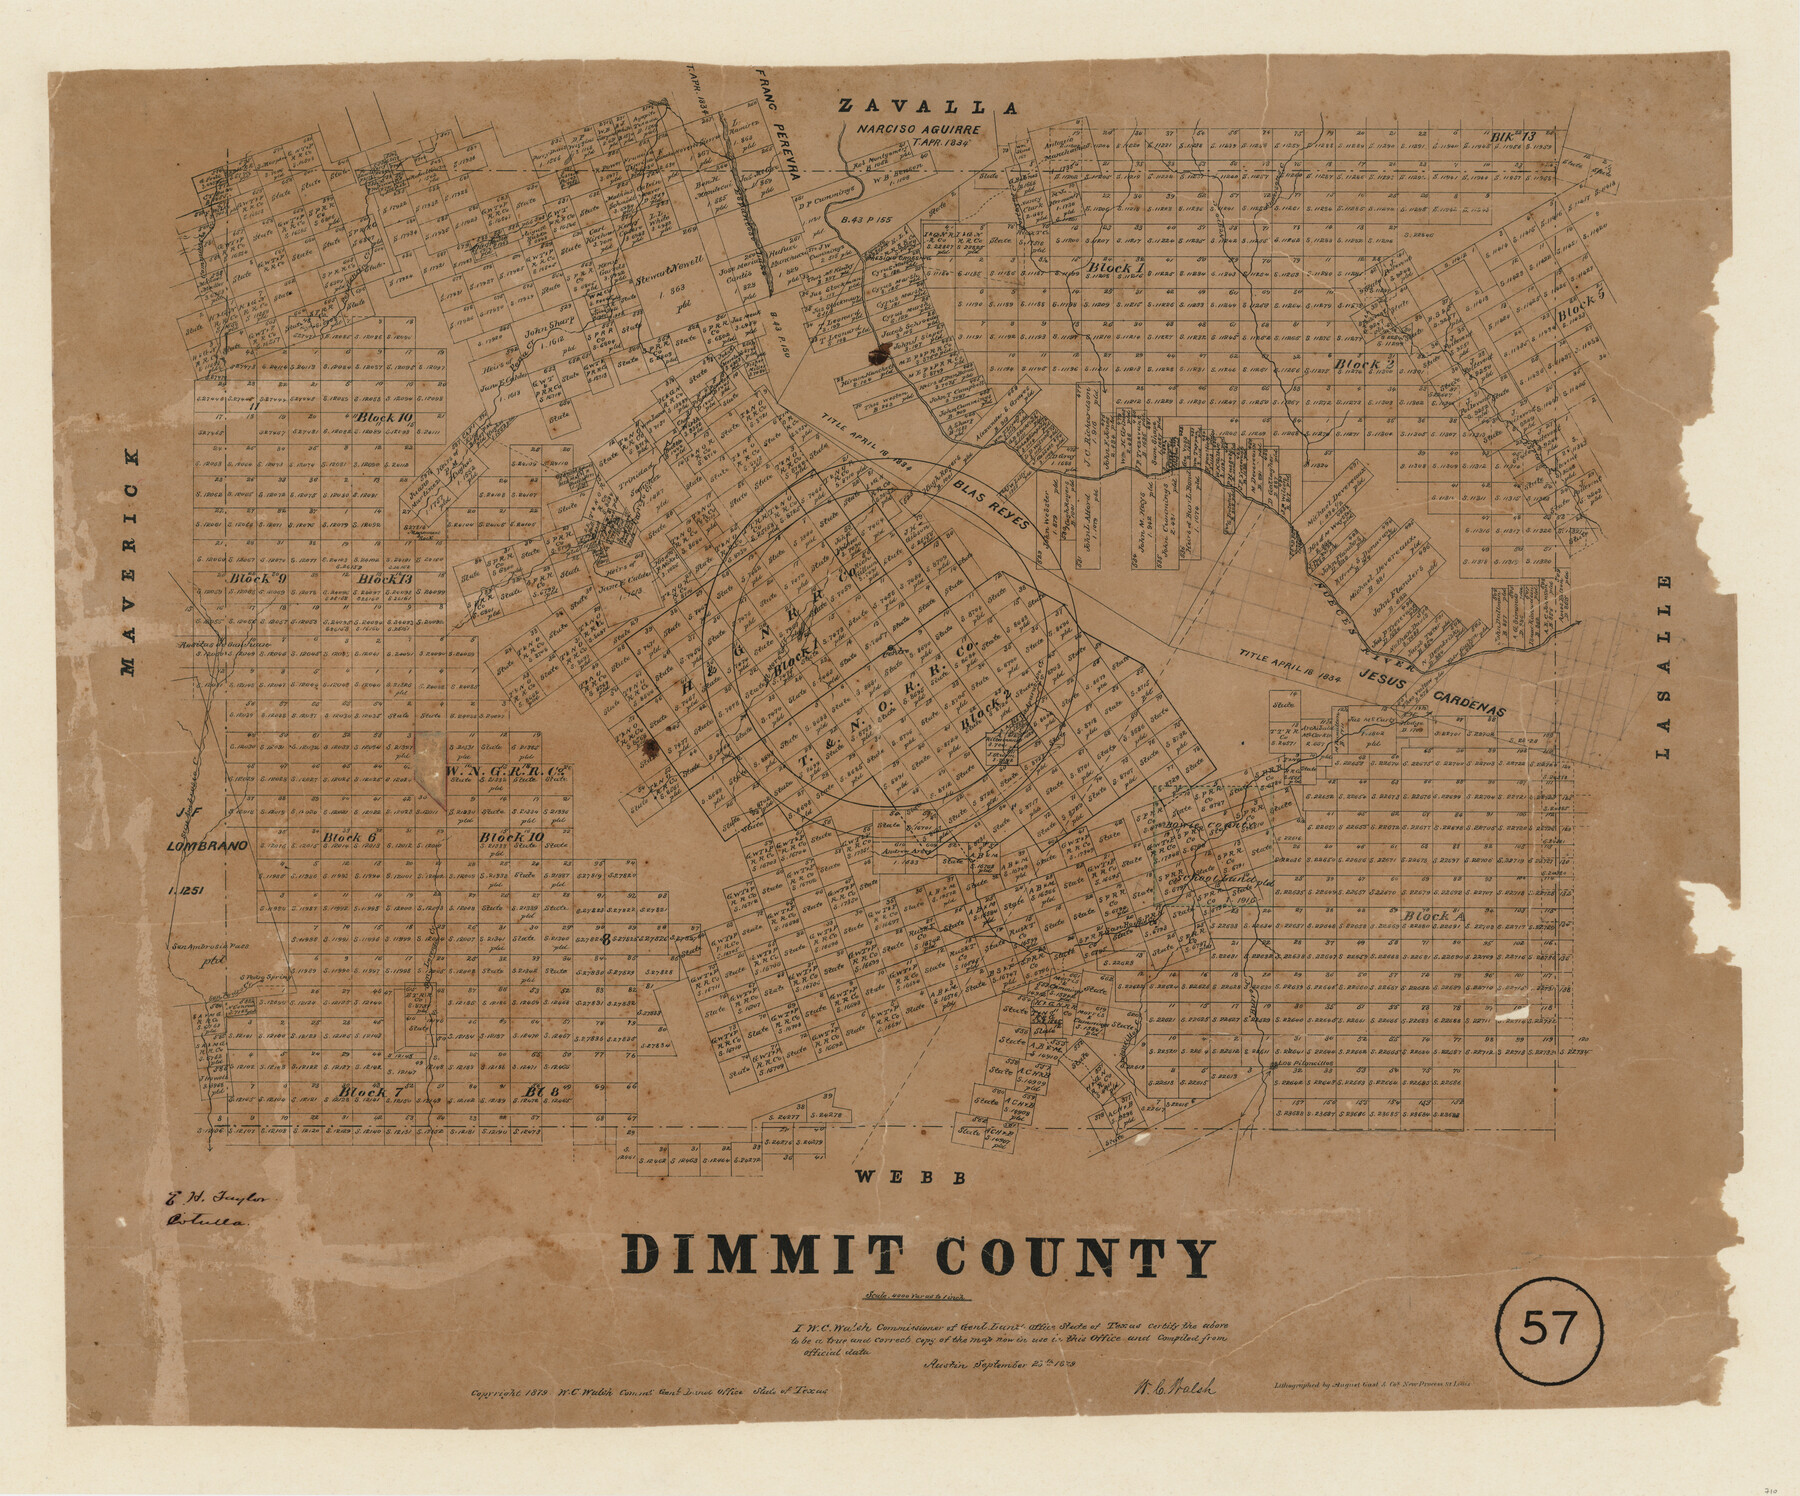 710, Dimmit County, Texas, Maddox Collection